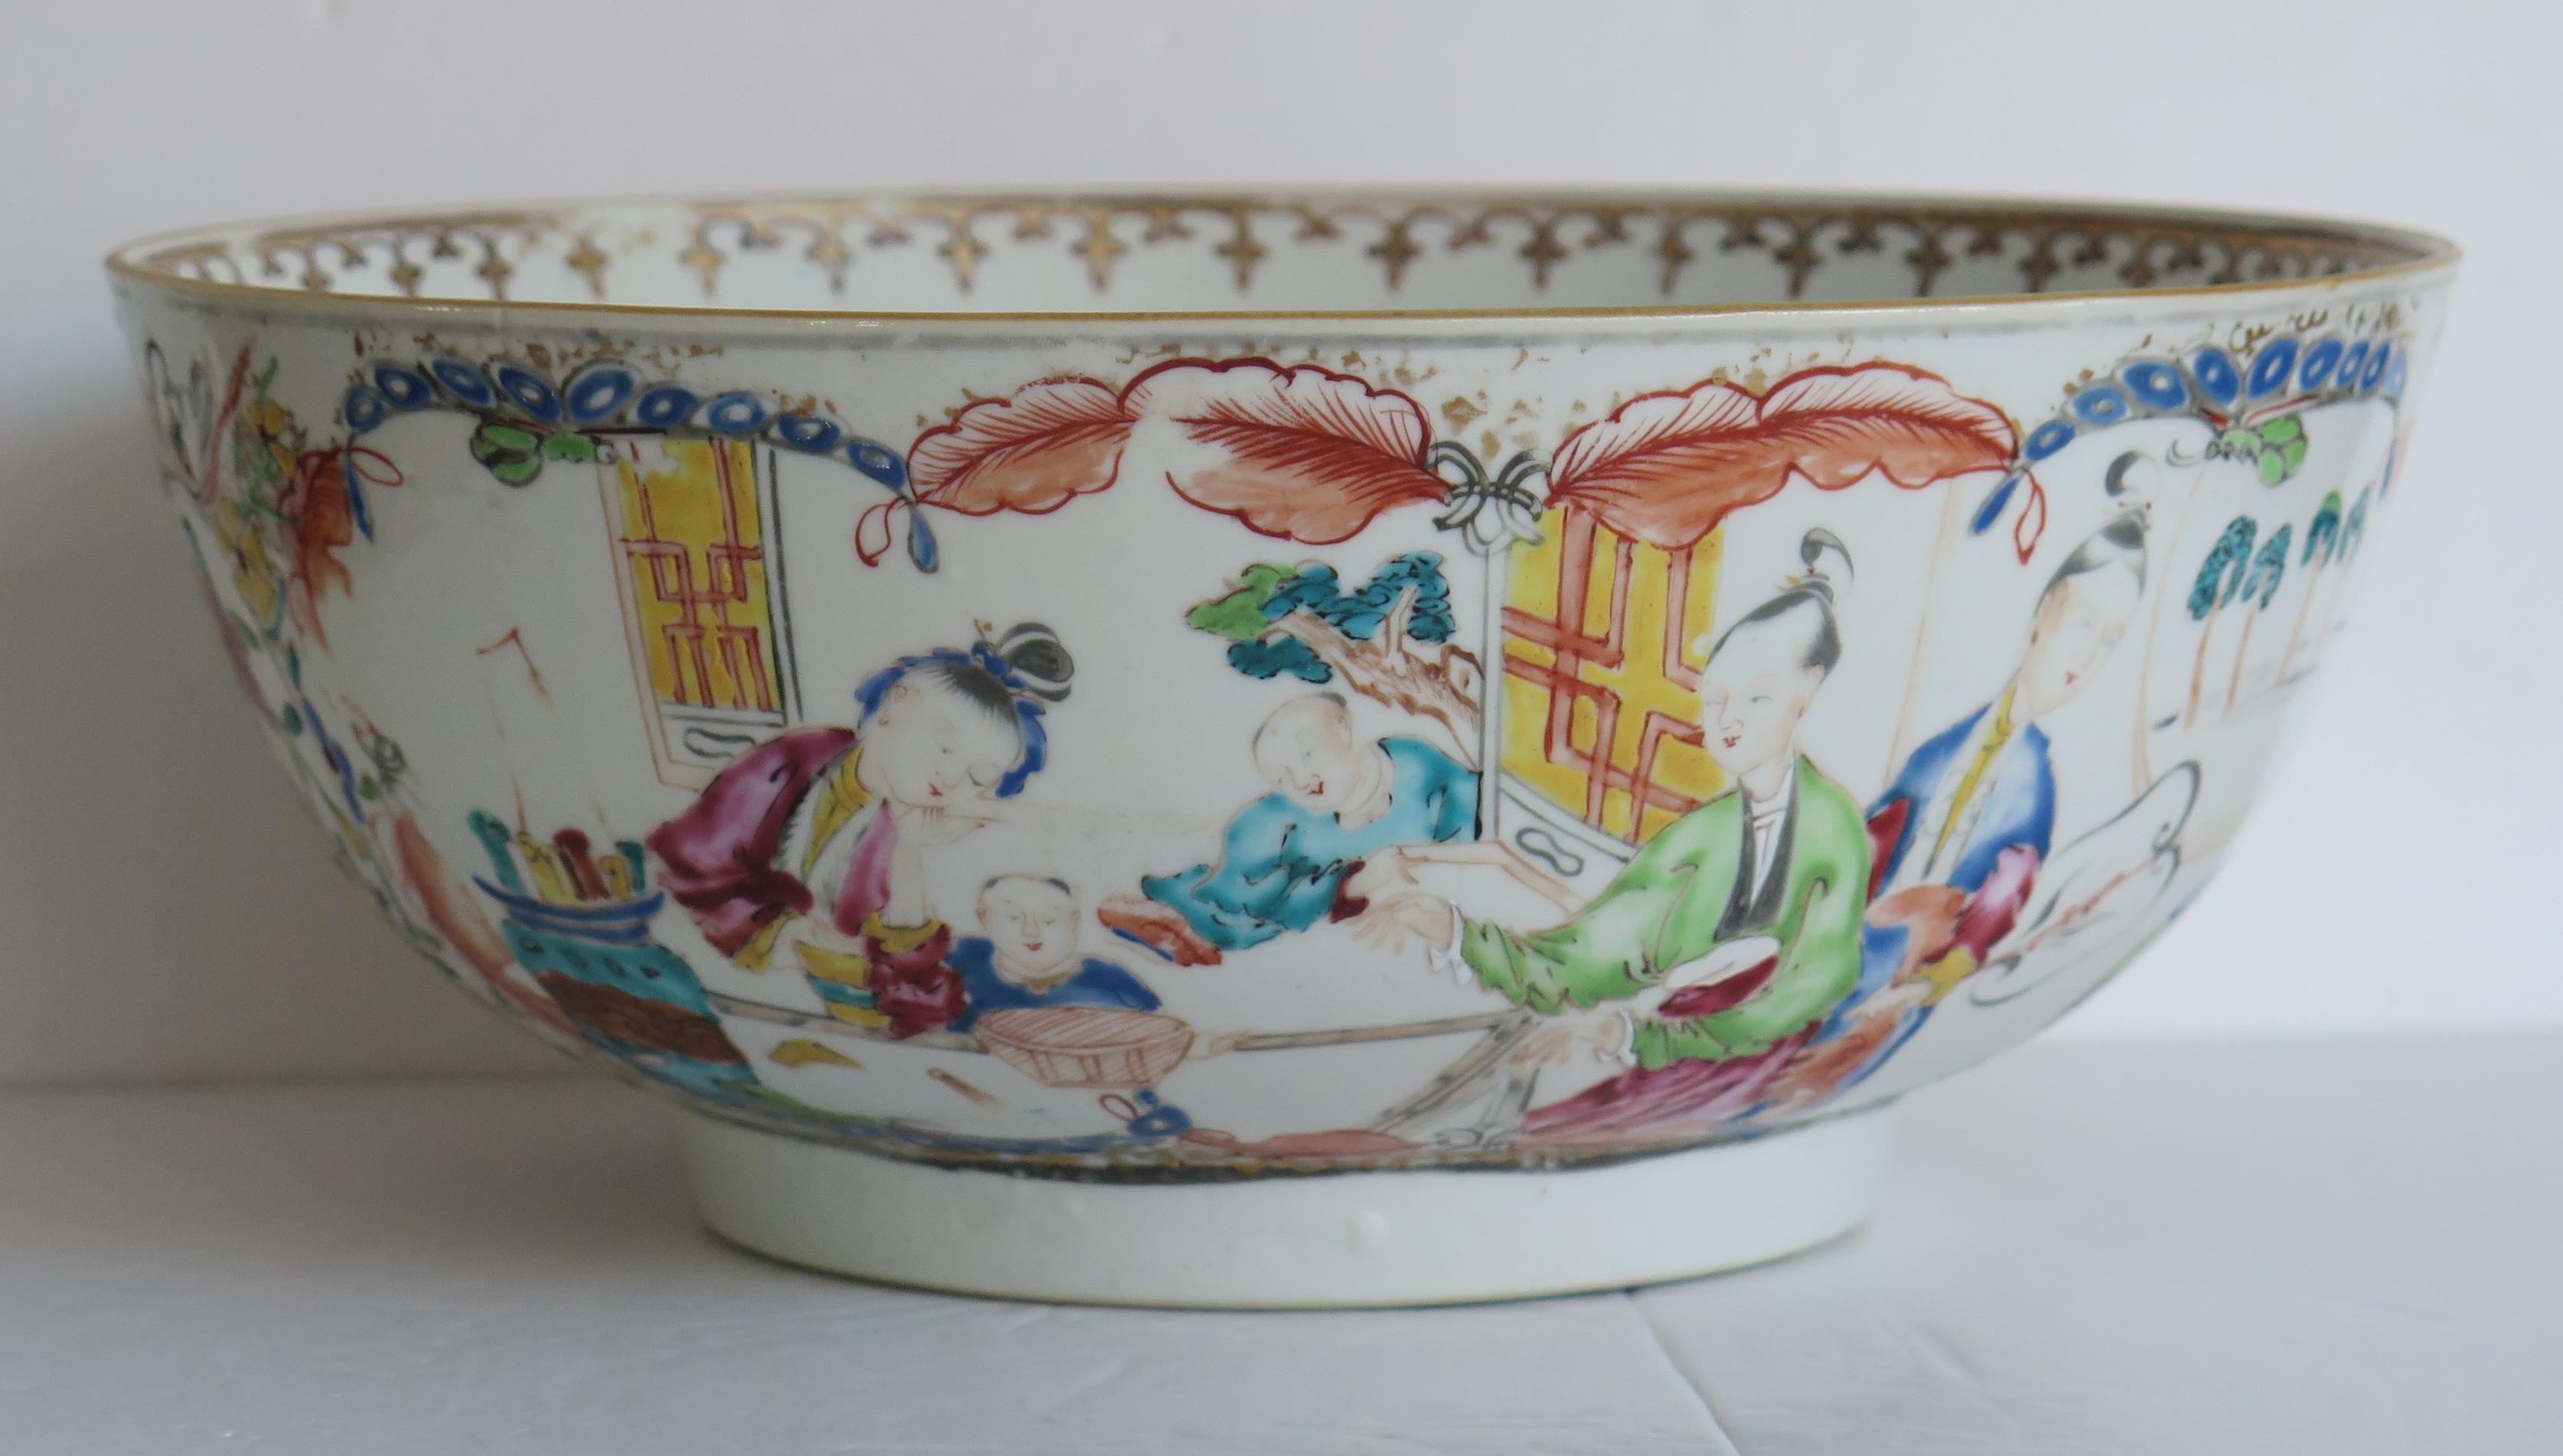 This is a finely hand painted Chinese export Large Bowl from the 18th century, Qing dynasty, Qianlong period, 1736-1795. We date this piece to circa 1770.

It is beautifully hand decorated with different and continuous Chinese figure scenes in